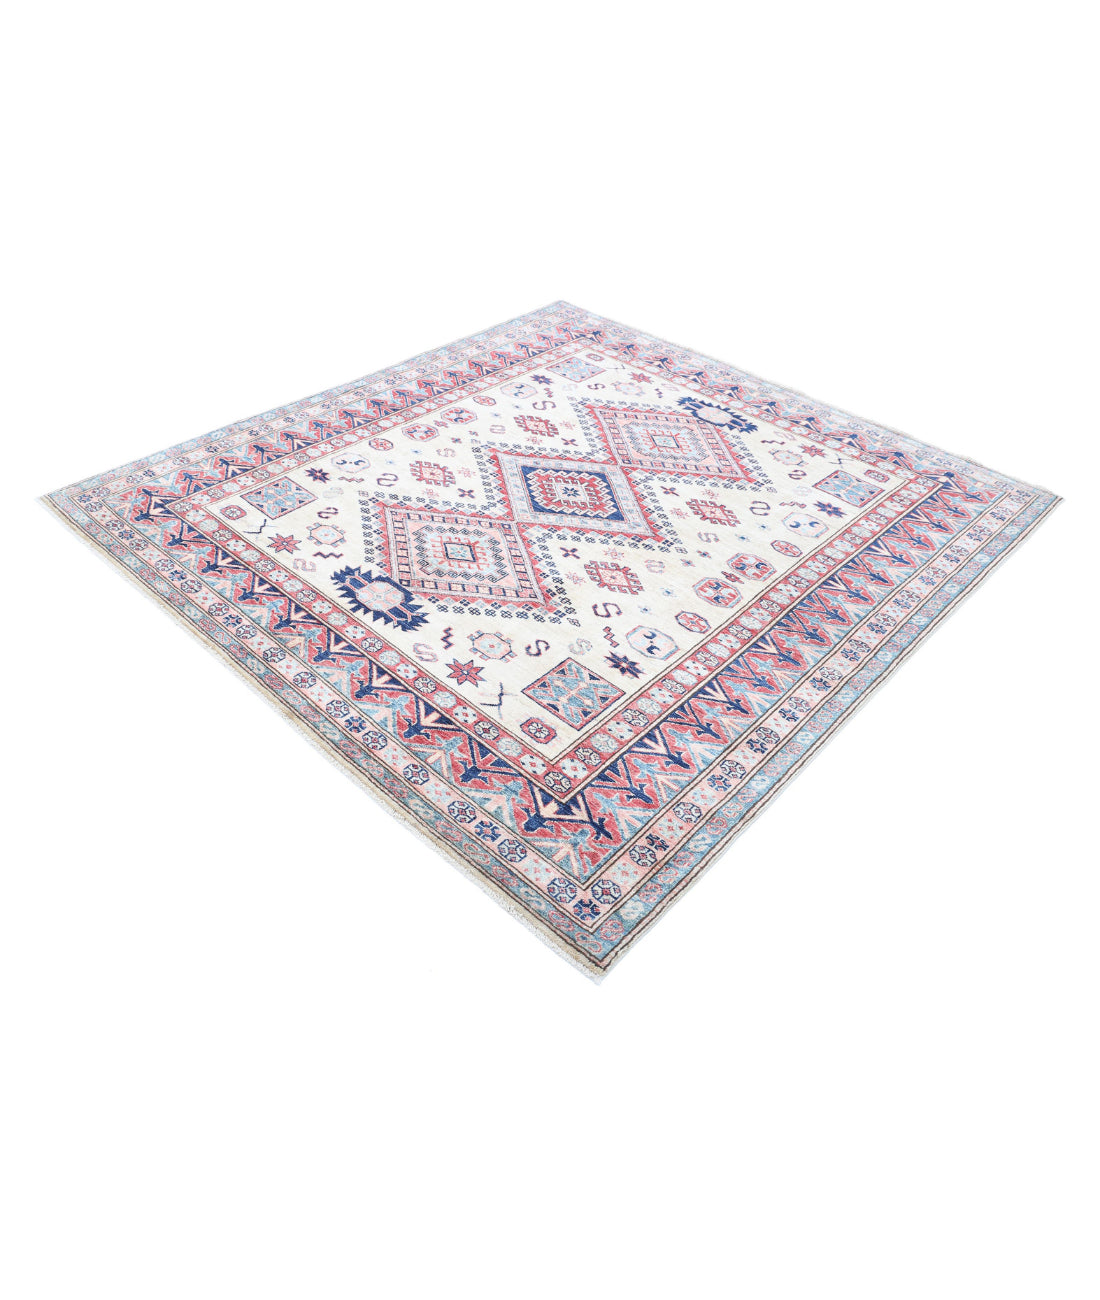 Hand Knotted Royal Kazak Wool Rug - 6'2'' x 6'8'' 6'2'' x 6'8'' (185 X 200) / Ivory / Red